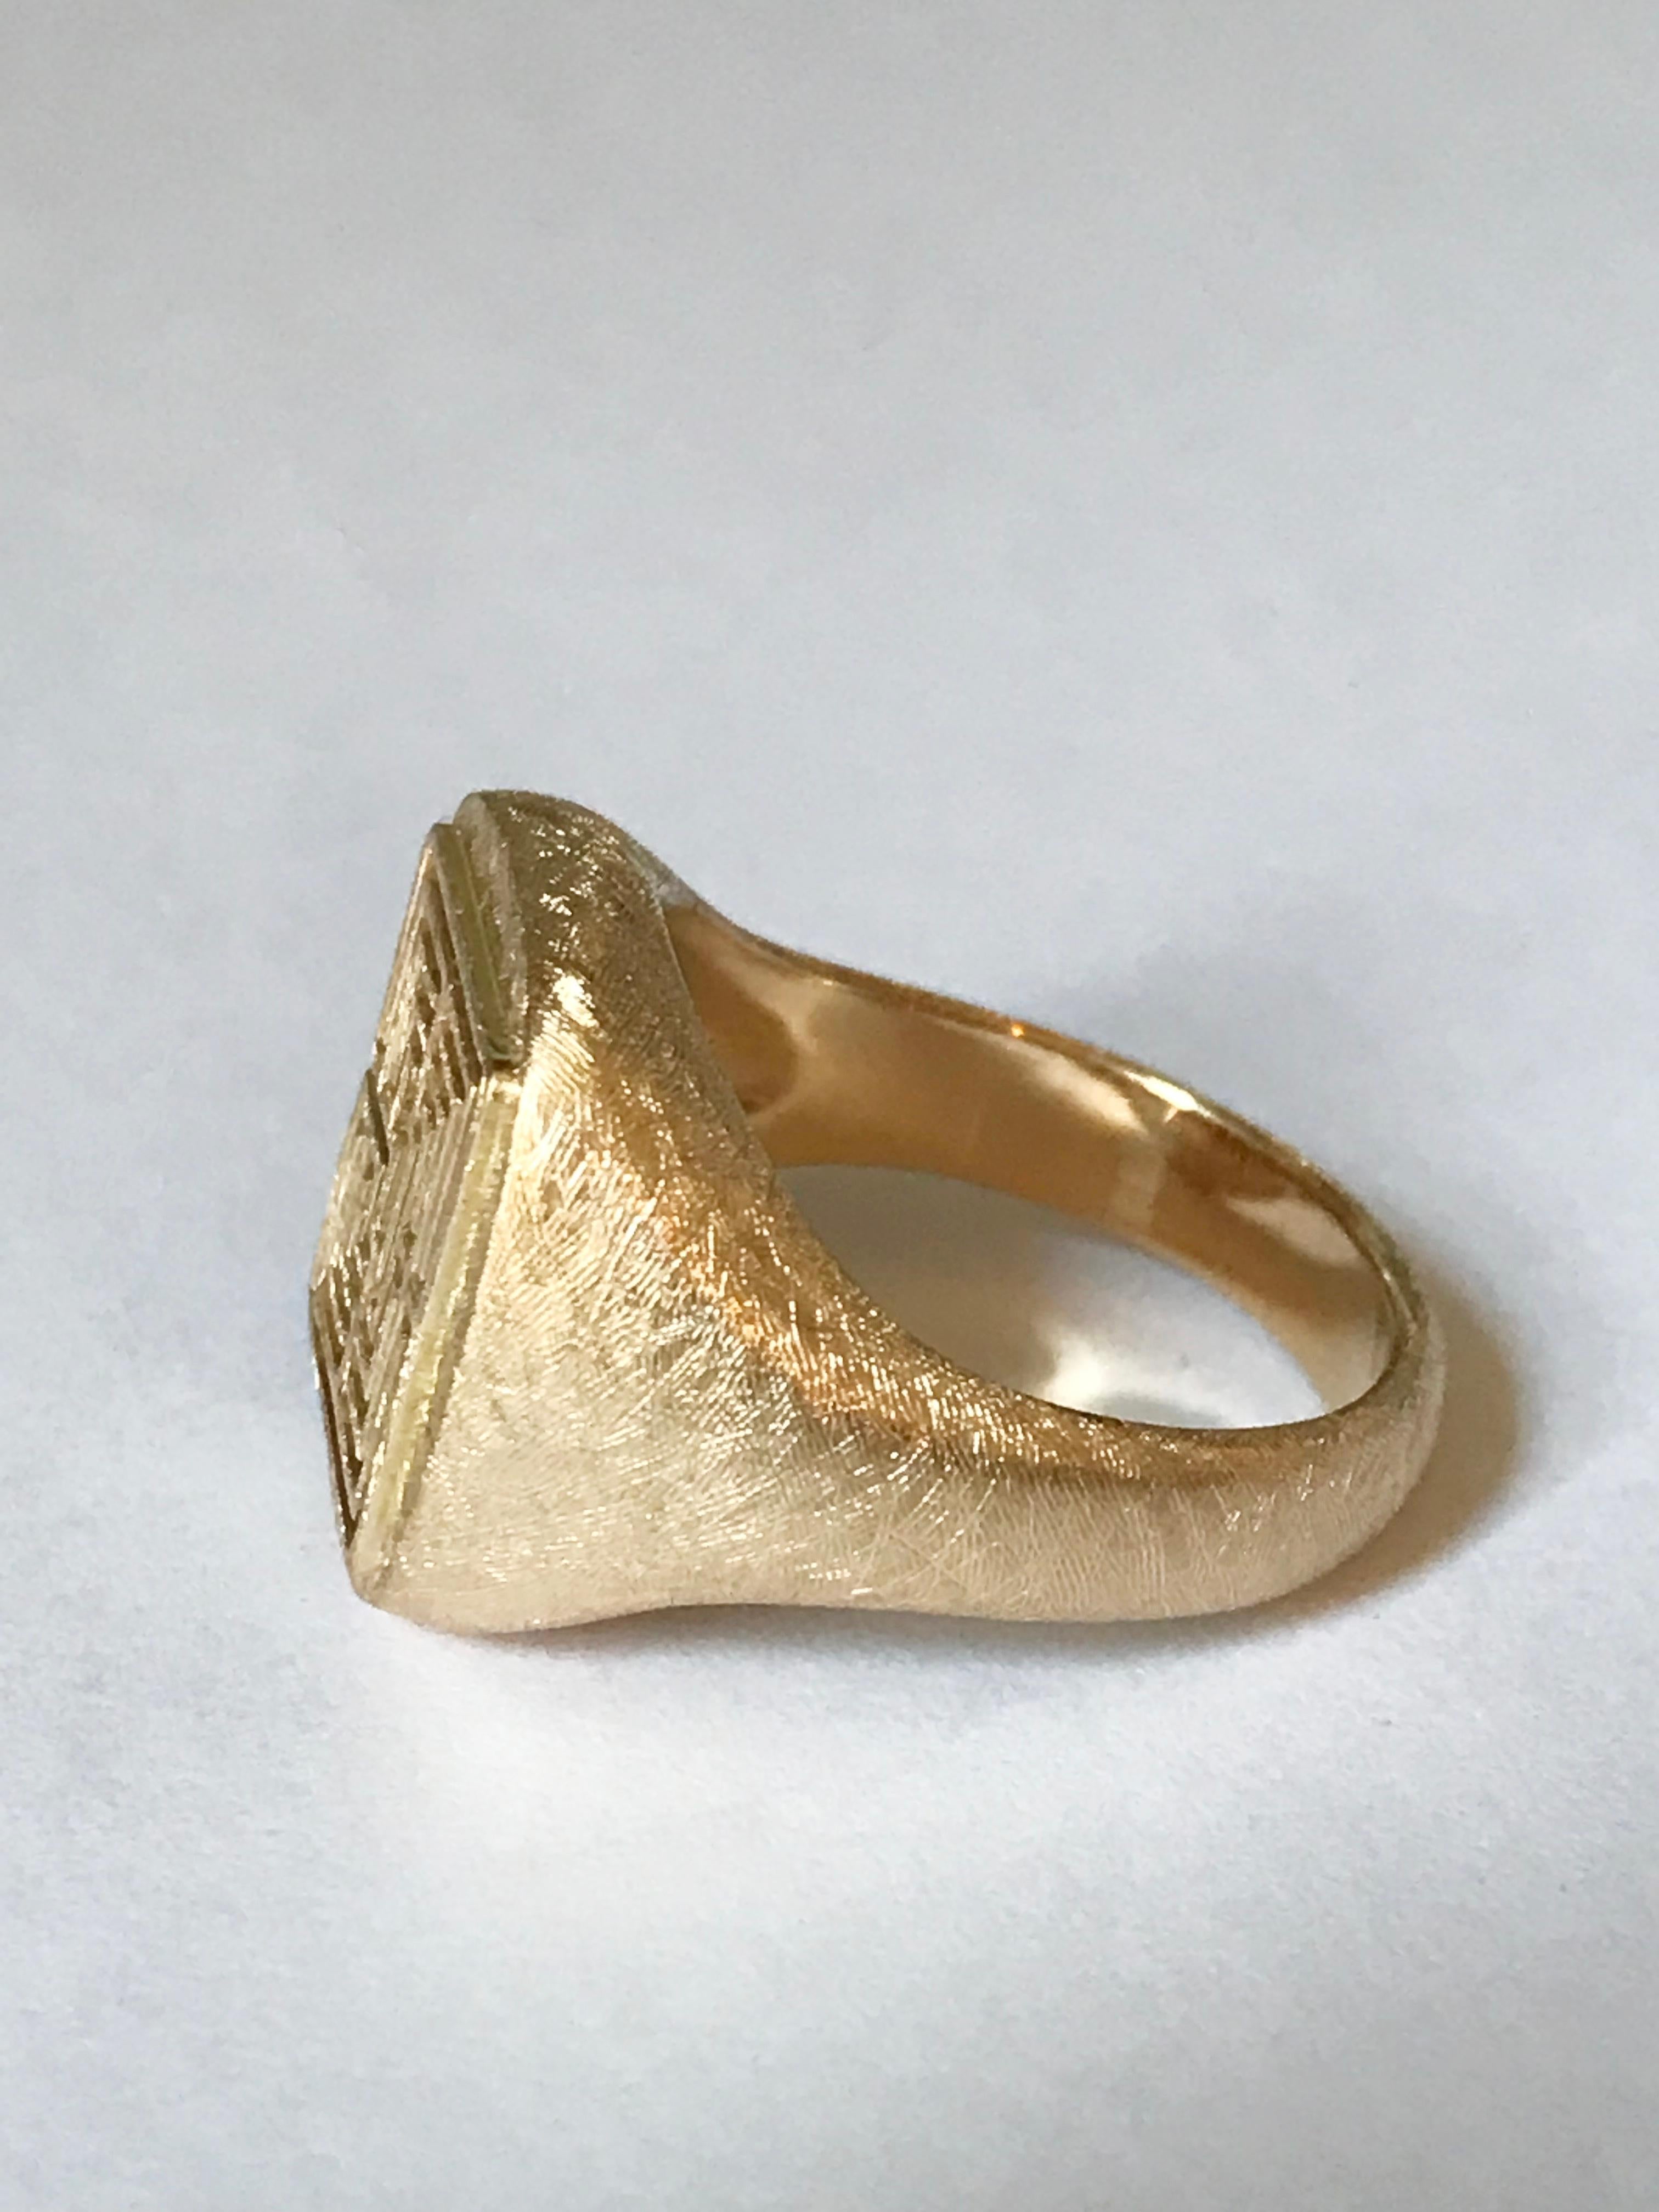 Dalben Yellow Gold Labyrinth Signet Ring For Sale 3